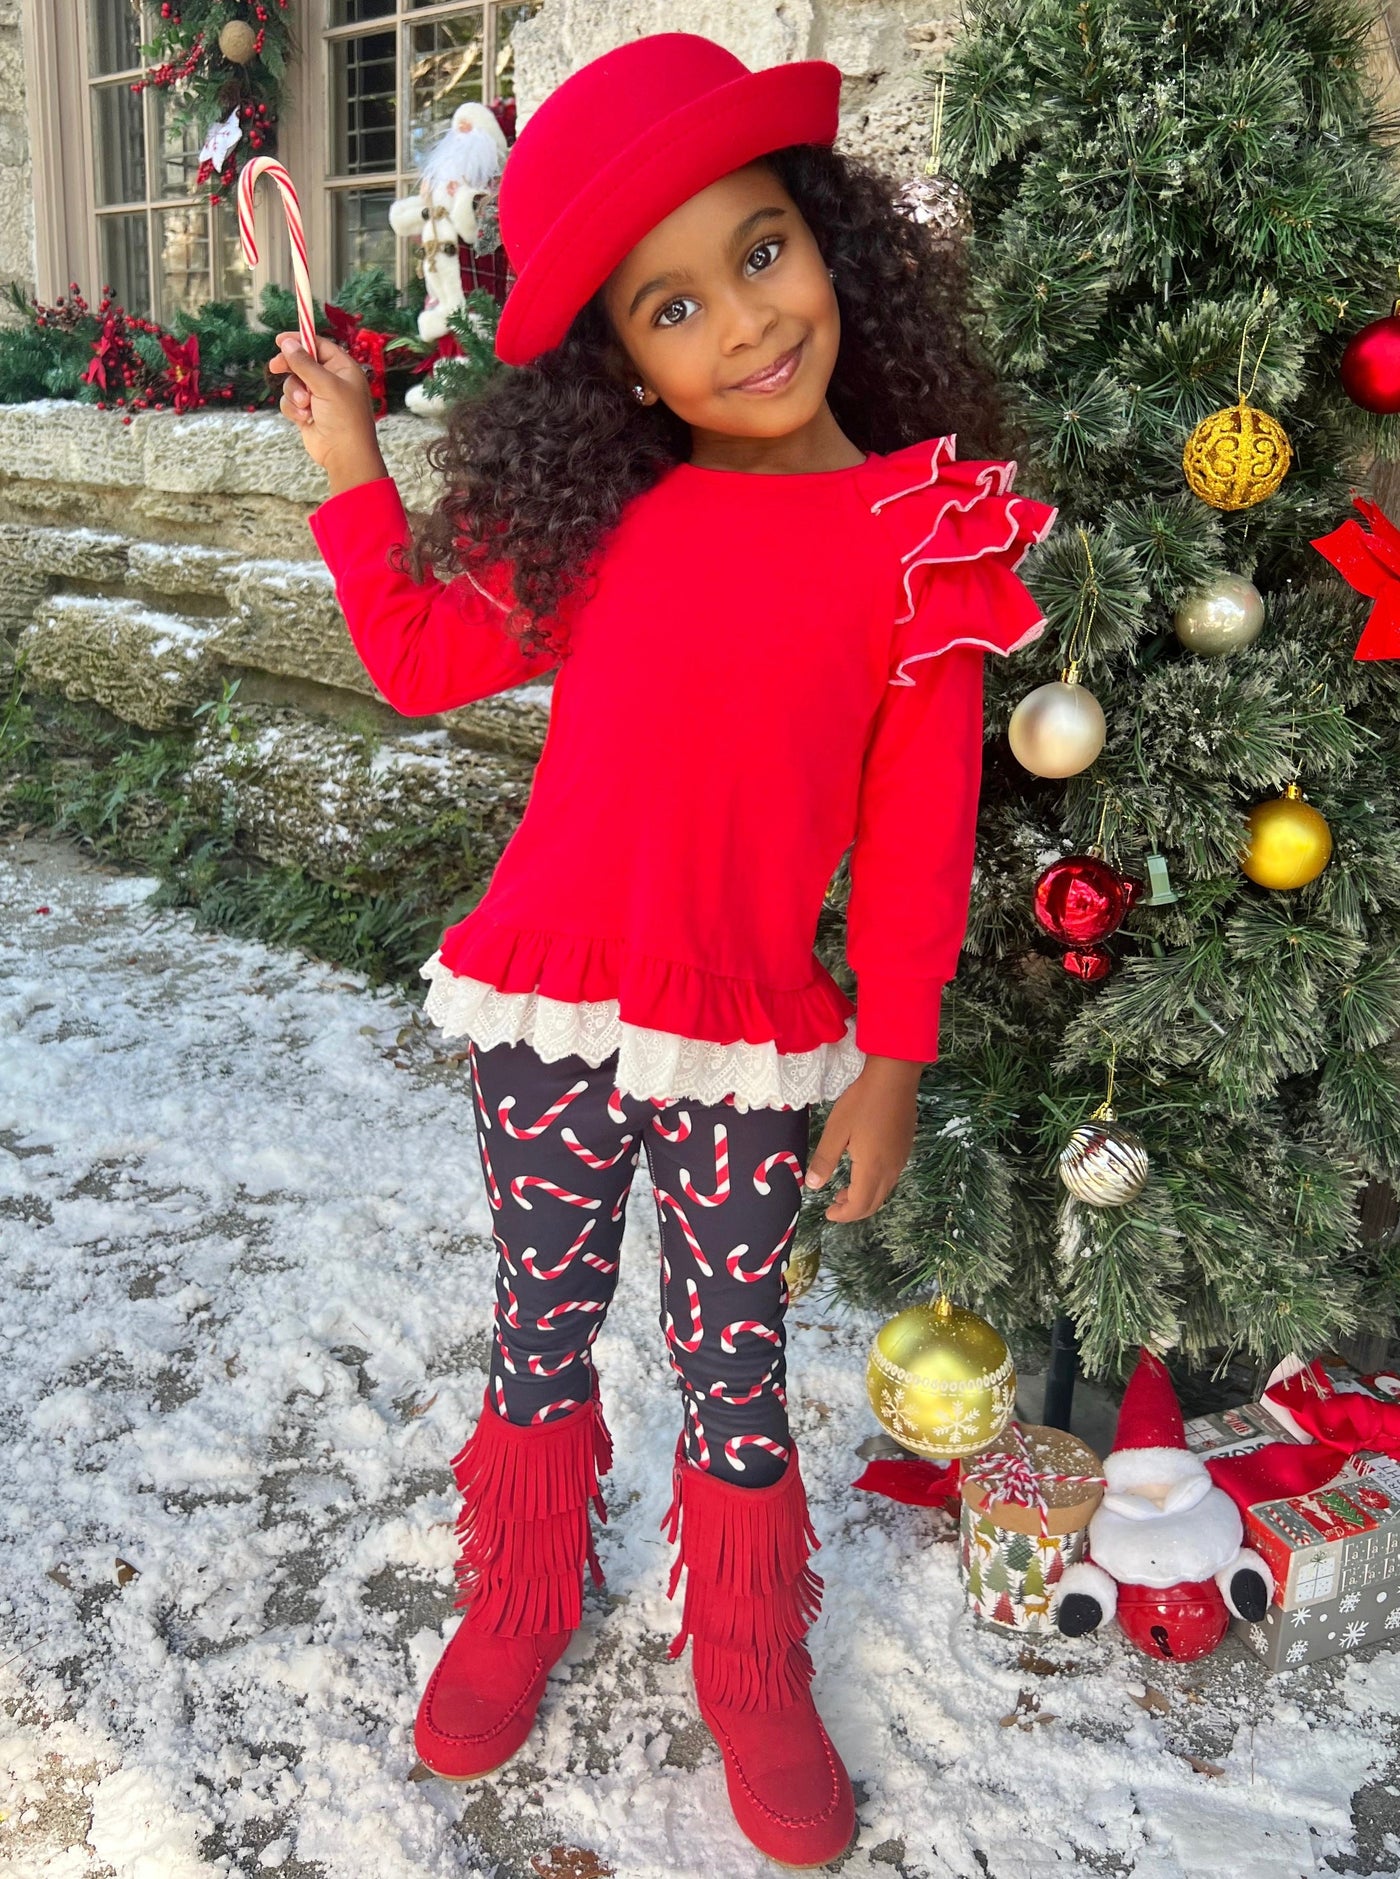 Mia Belle Girls Top & Candy Cane Legging Set | Girls Winter Outfits